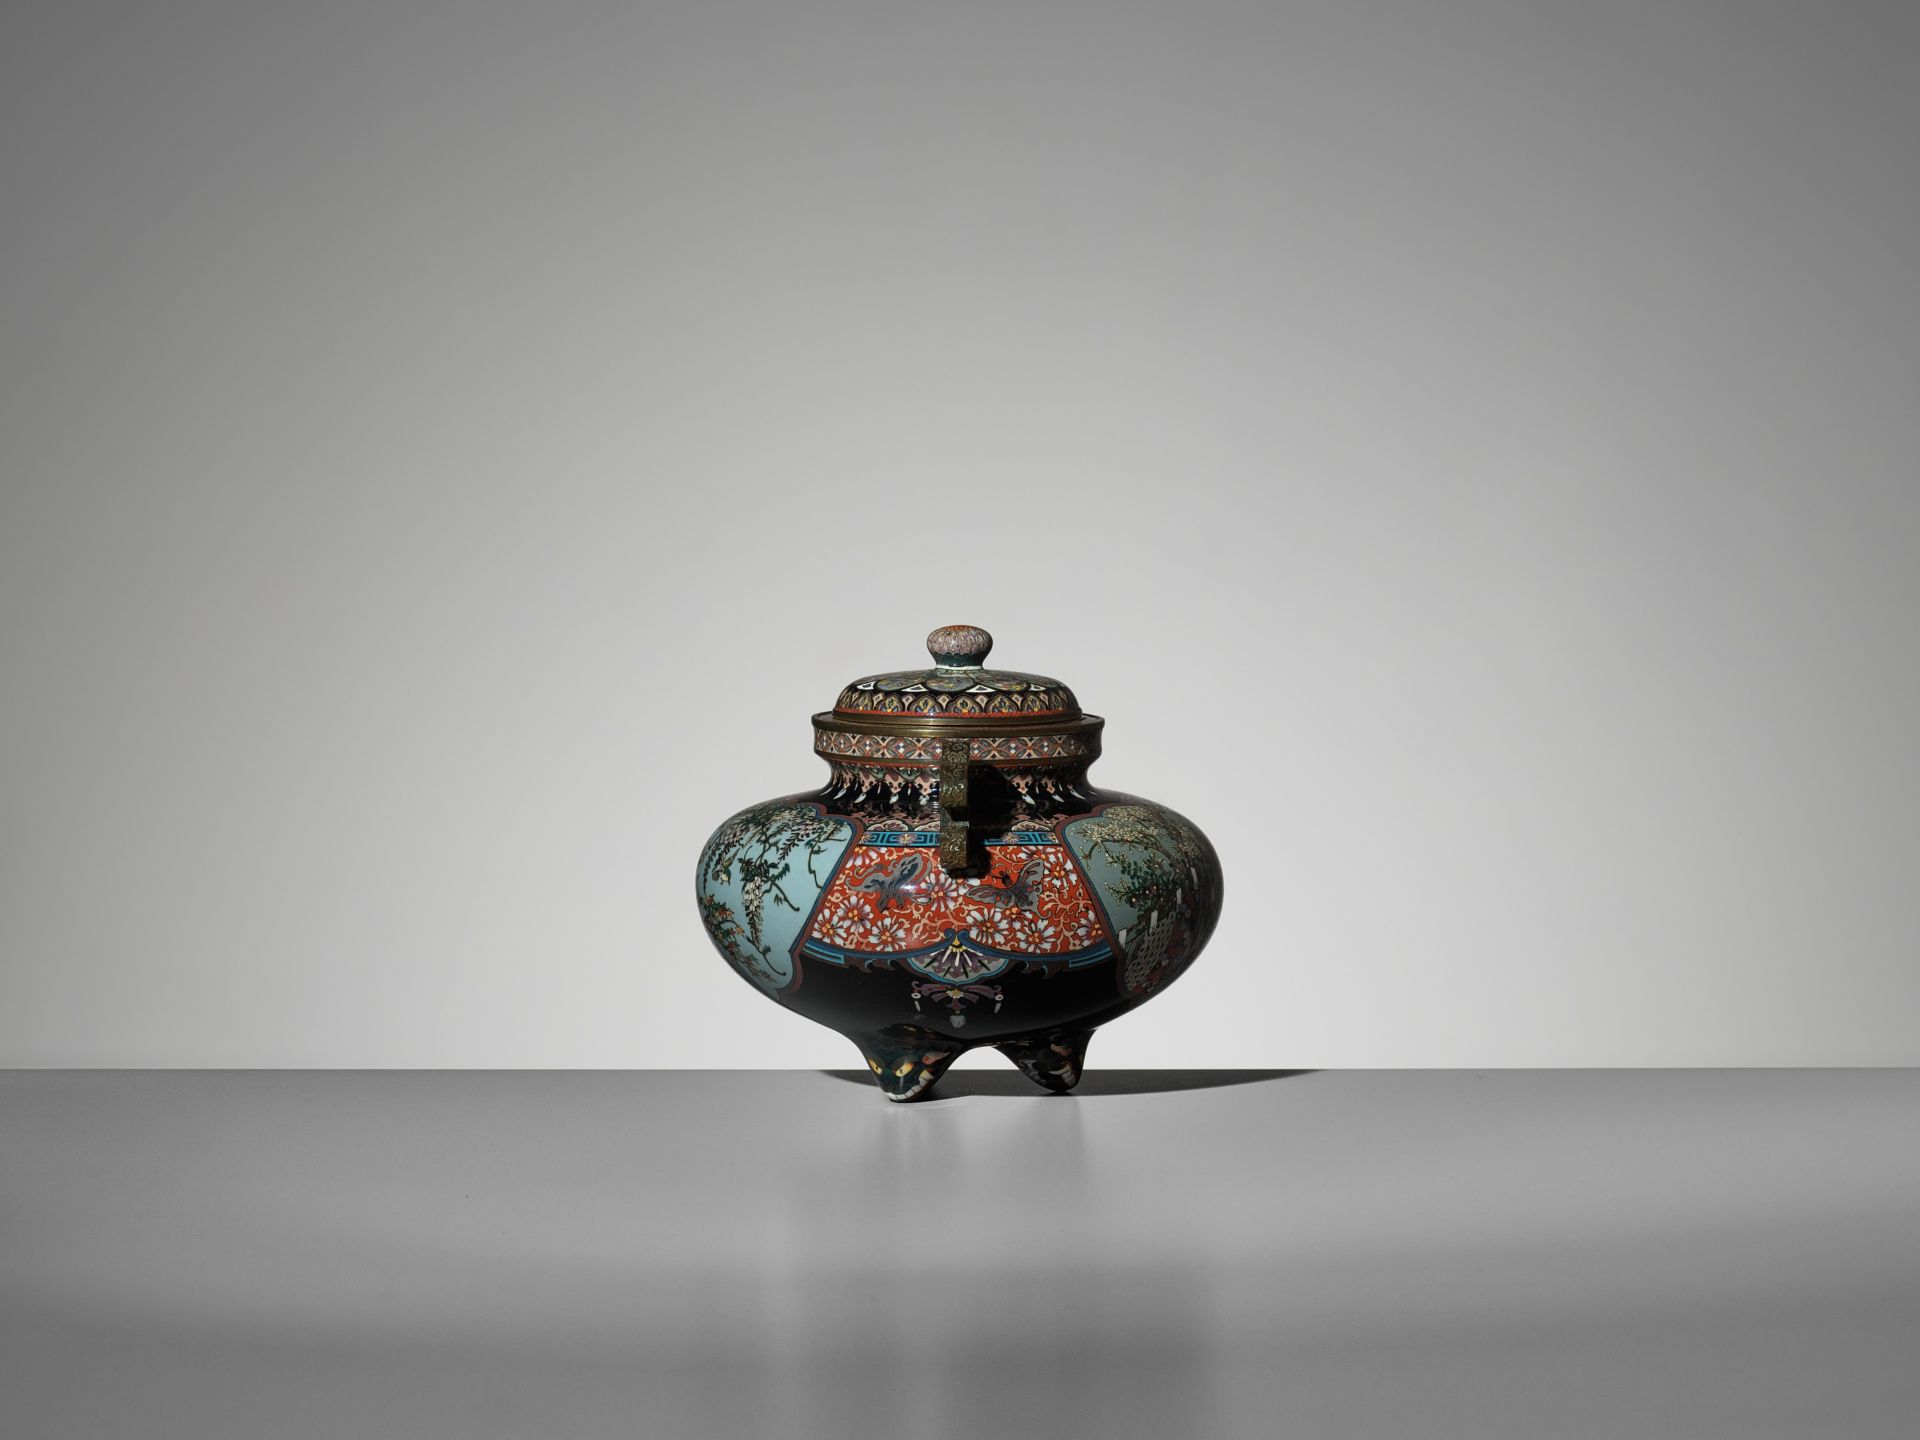 A FINE CLOISONNÃ‰ KORO (INCENSE BURNER) AND COVER, STYLE OF HAYASHI KODENJI - Image 9 of 11